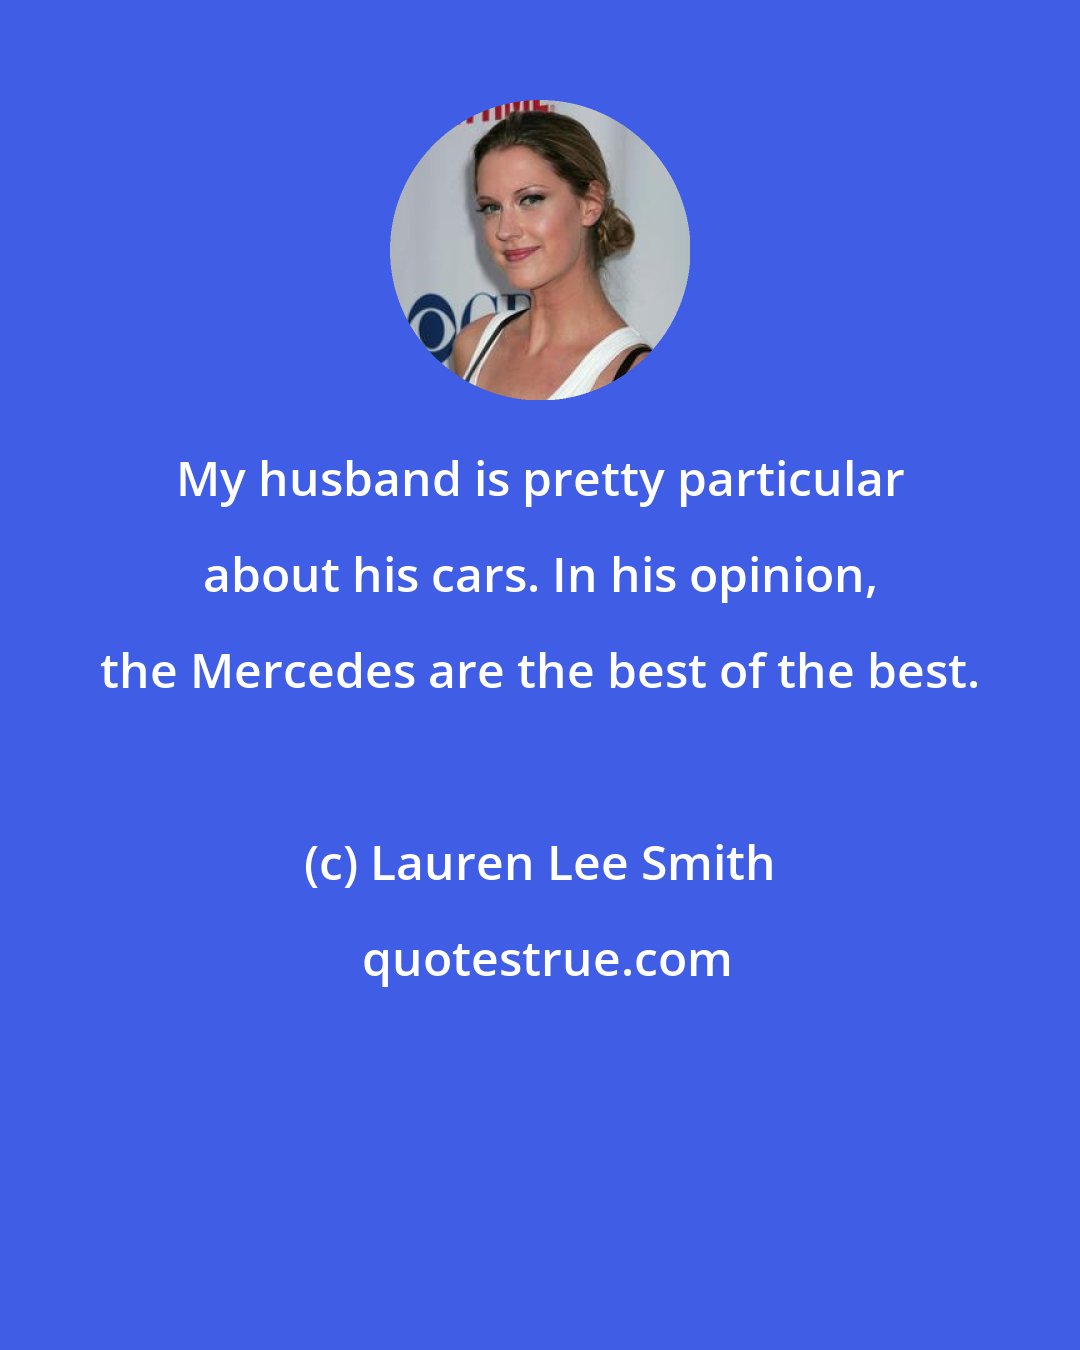 Lauren Lee Smith: My husband is pretty particular about his cars. In his opinion, the Mercedes are the best of the best.